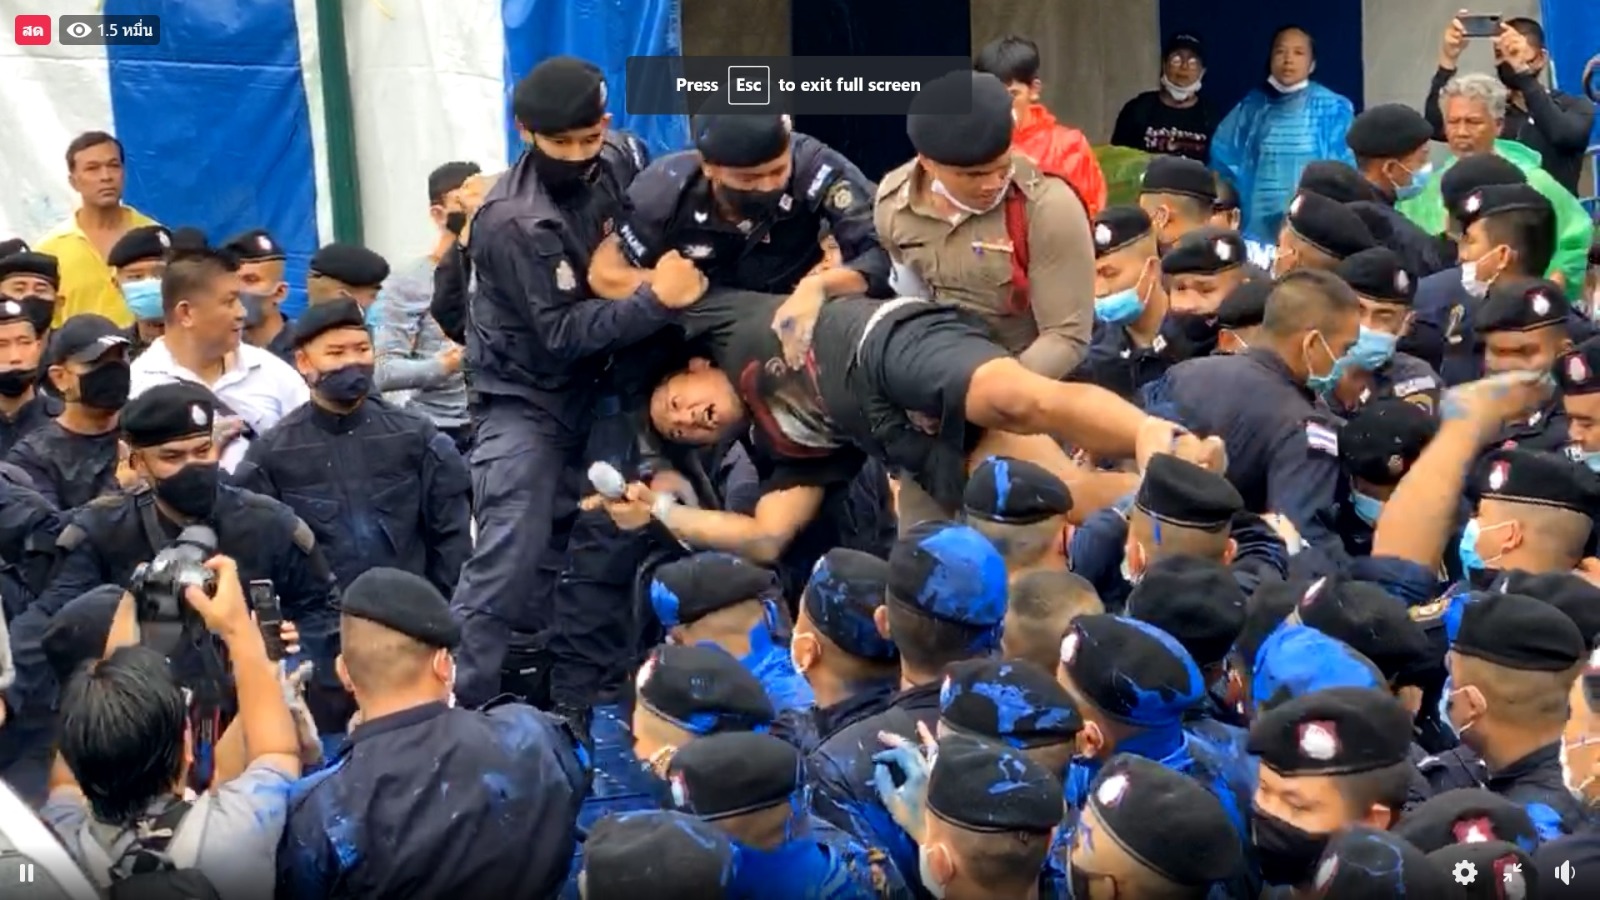 Jatupat ‘Pai Dao Din’ Boonpattarasaksa is carried away by police Tuesday afternoon in a still image captured from a live video of the incident. 